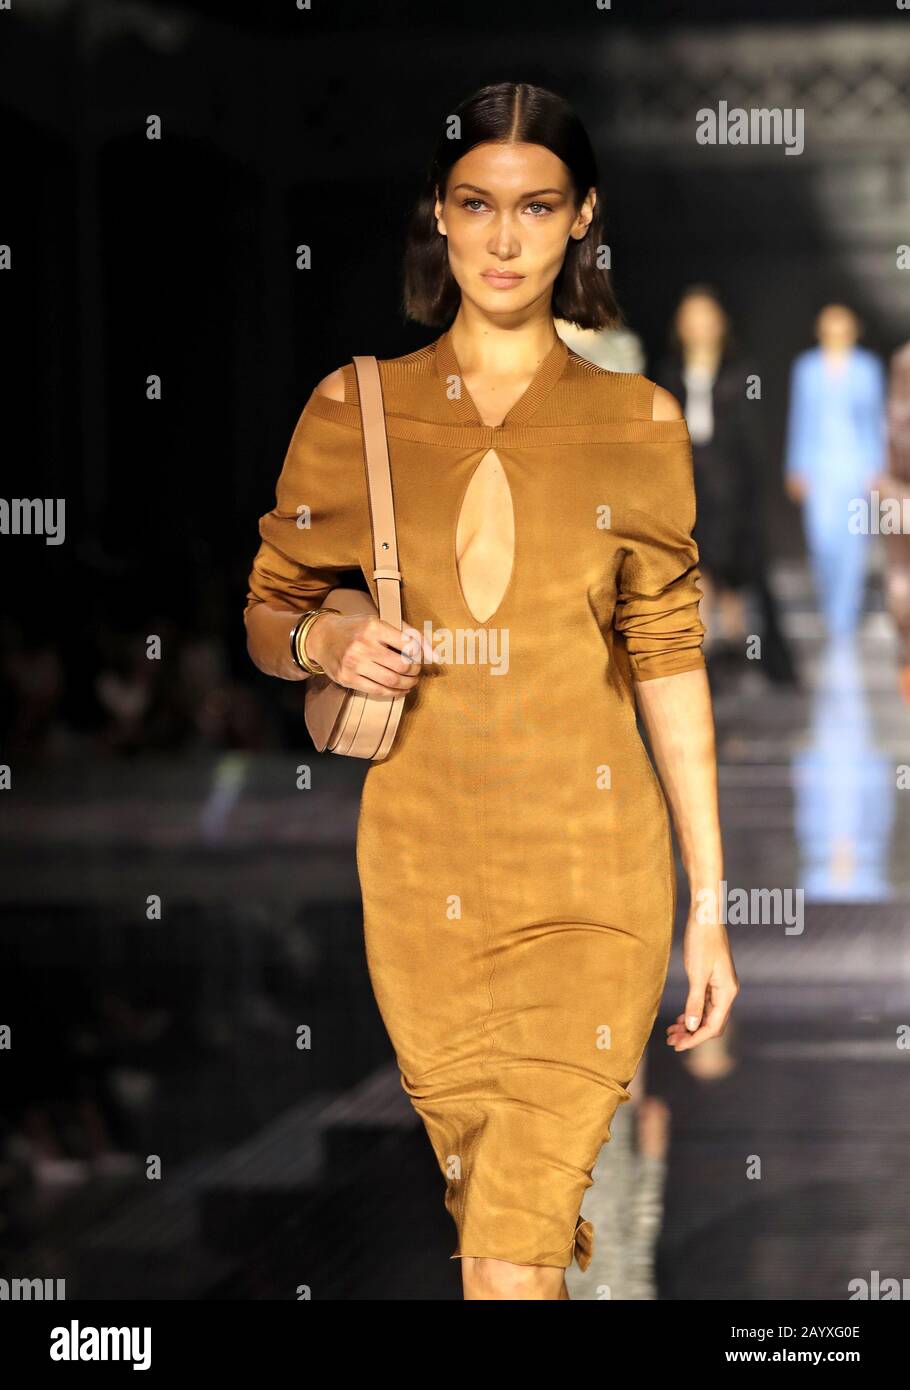 Bella Hadid during the Burberry show at London Fashion Week February 2020,  held at Olympia National, London Stock Photo - Alamy